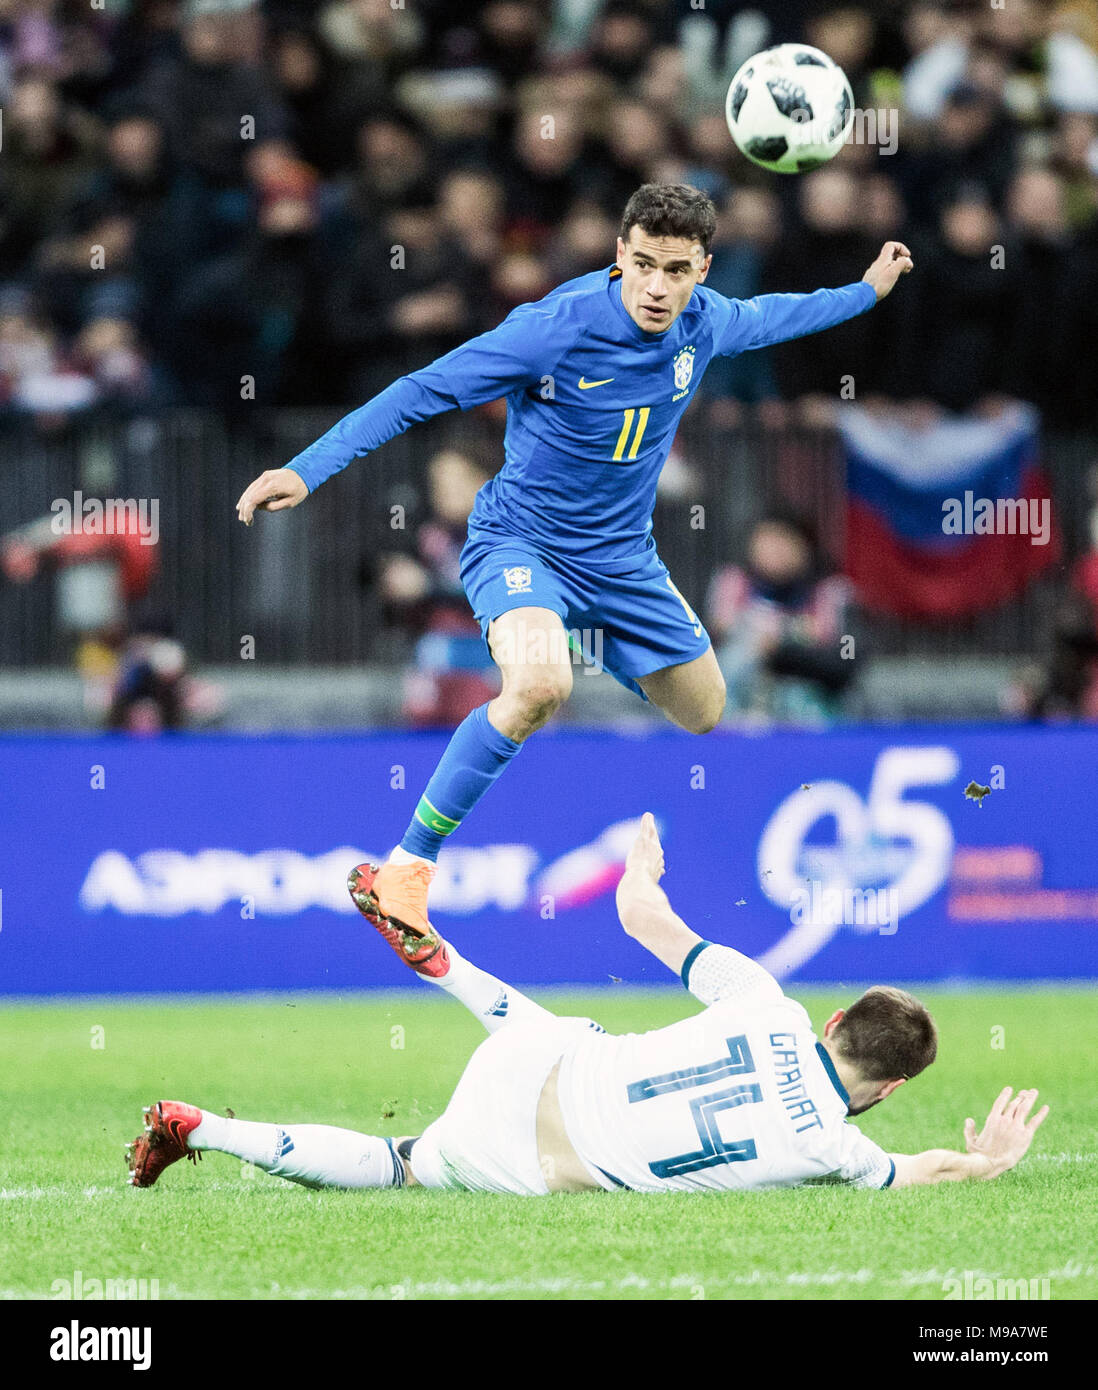 Moscow, Russia. 23rd Mar, 2018. Philippe Coutinho (Top) of Brazil is tackled by Vladimir Granat of Russia during the international friendly match between Russia and Brazil at Luzhniki Stadium in Moscow, Russia, on March 23, 2018. Brazil won 3-0. Credit: Wu Zhuang/Xinhua/Alamy Live News Stock Photo